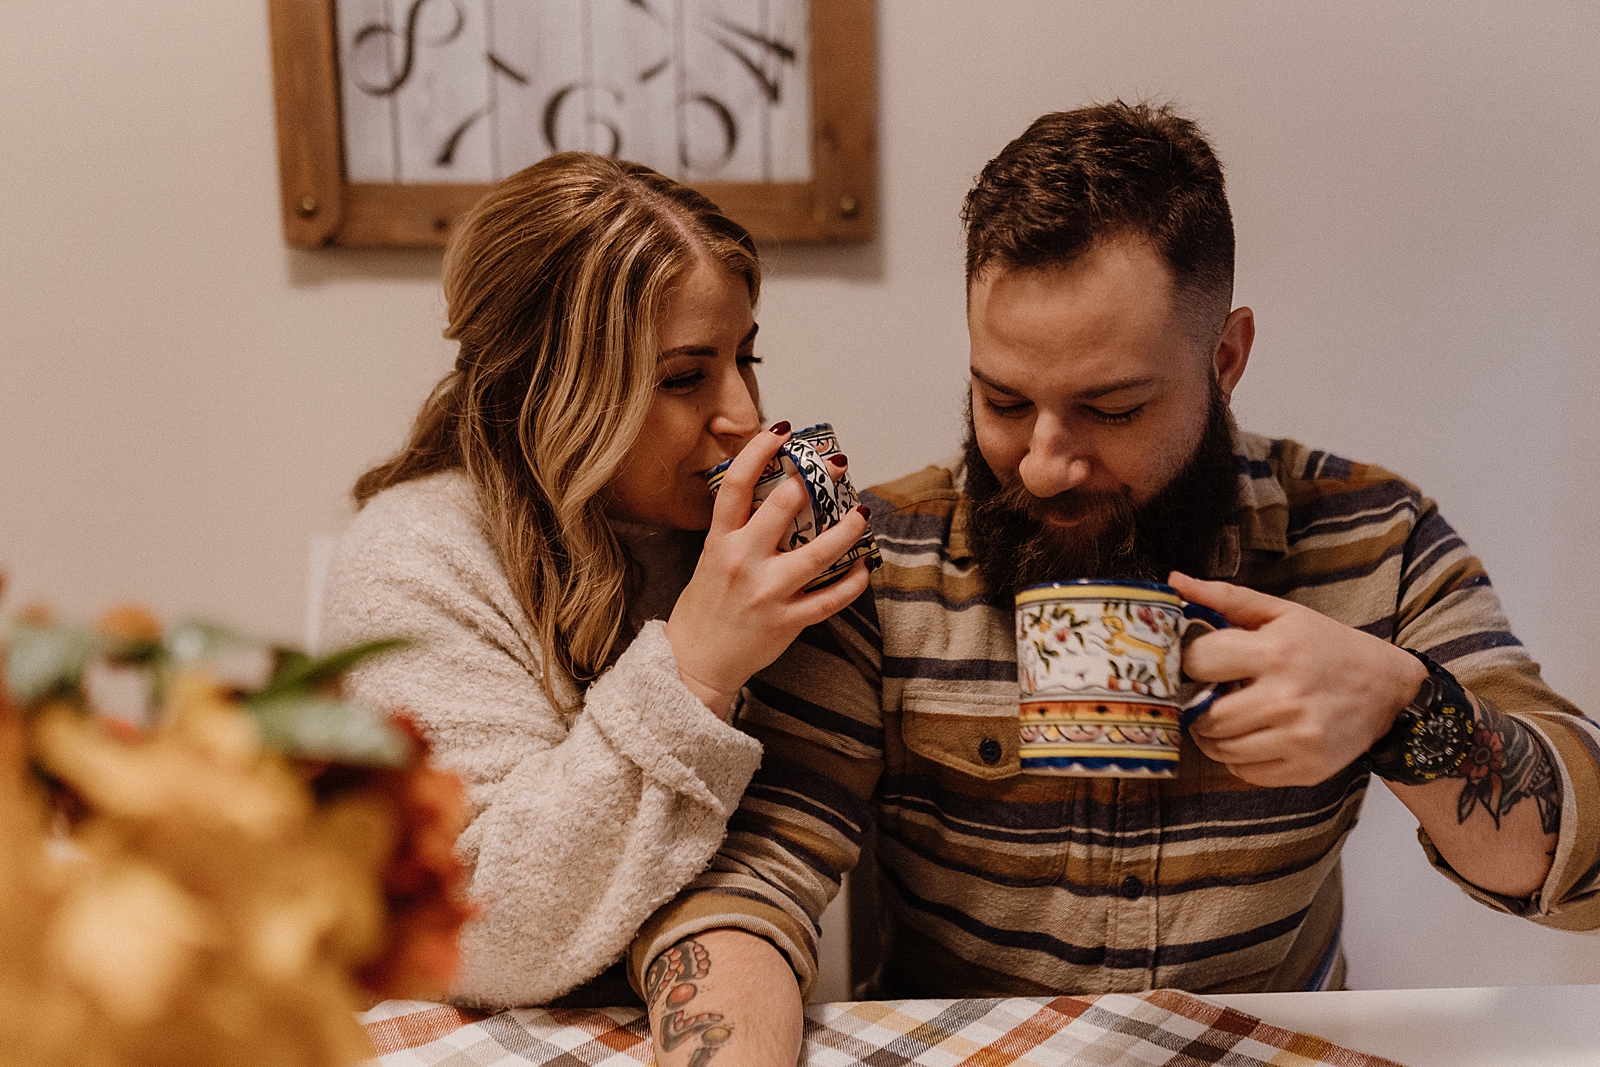 Couple sitting together at table and drinking out of mugs